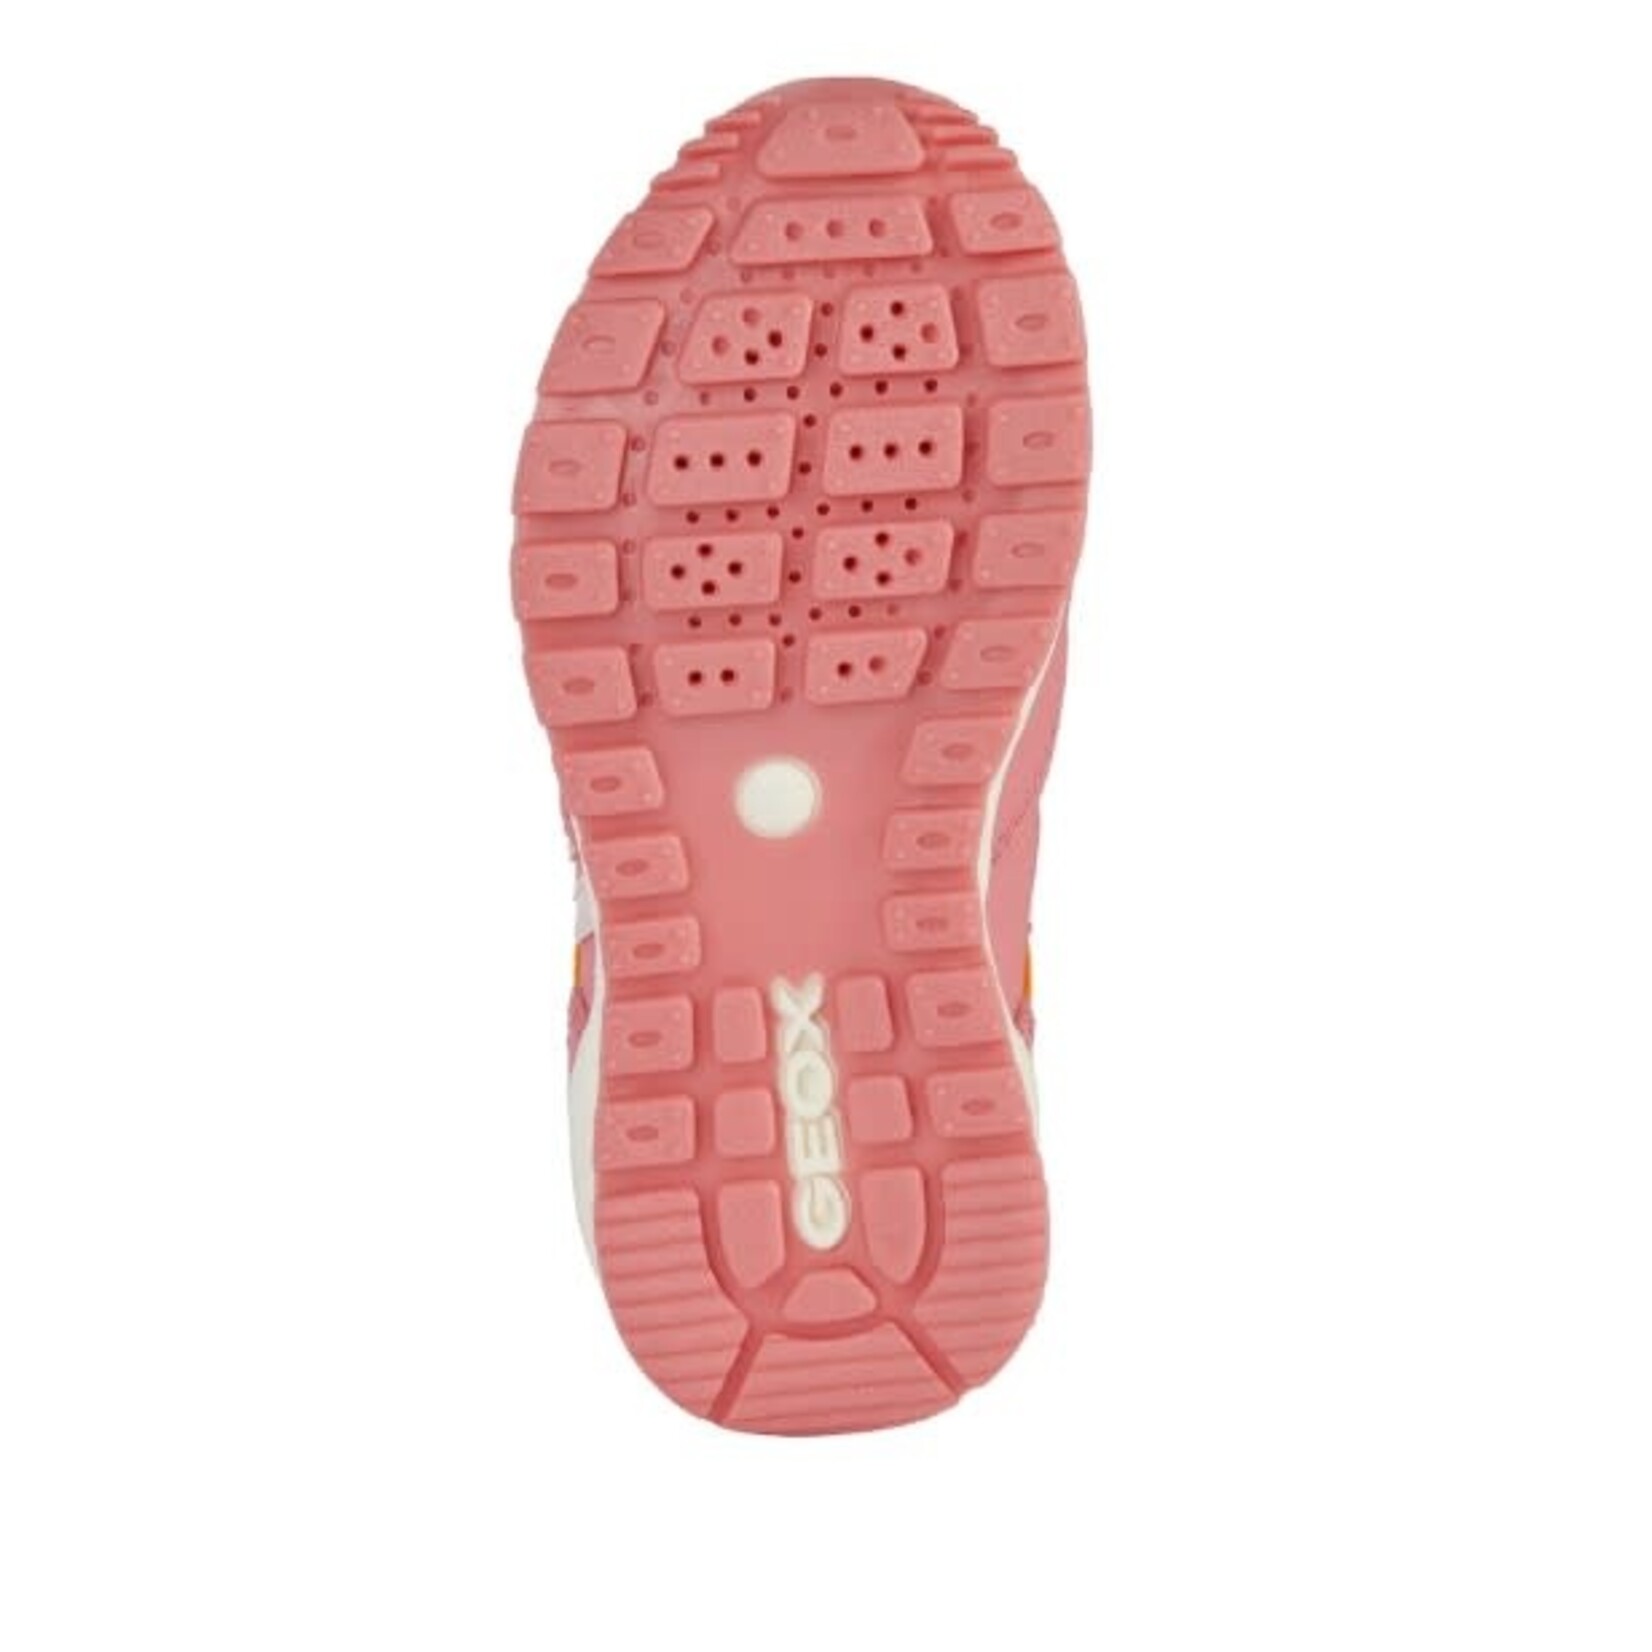 Geox GEOX - Running shoes in synthetic leather and mesh  'Pavel - Light coral/Light pink'